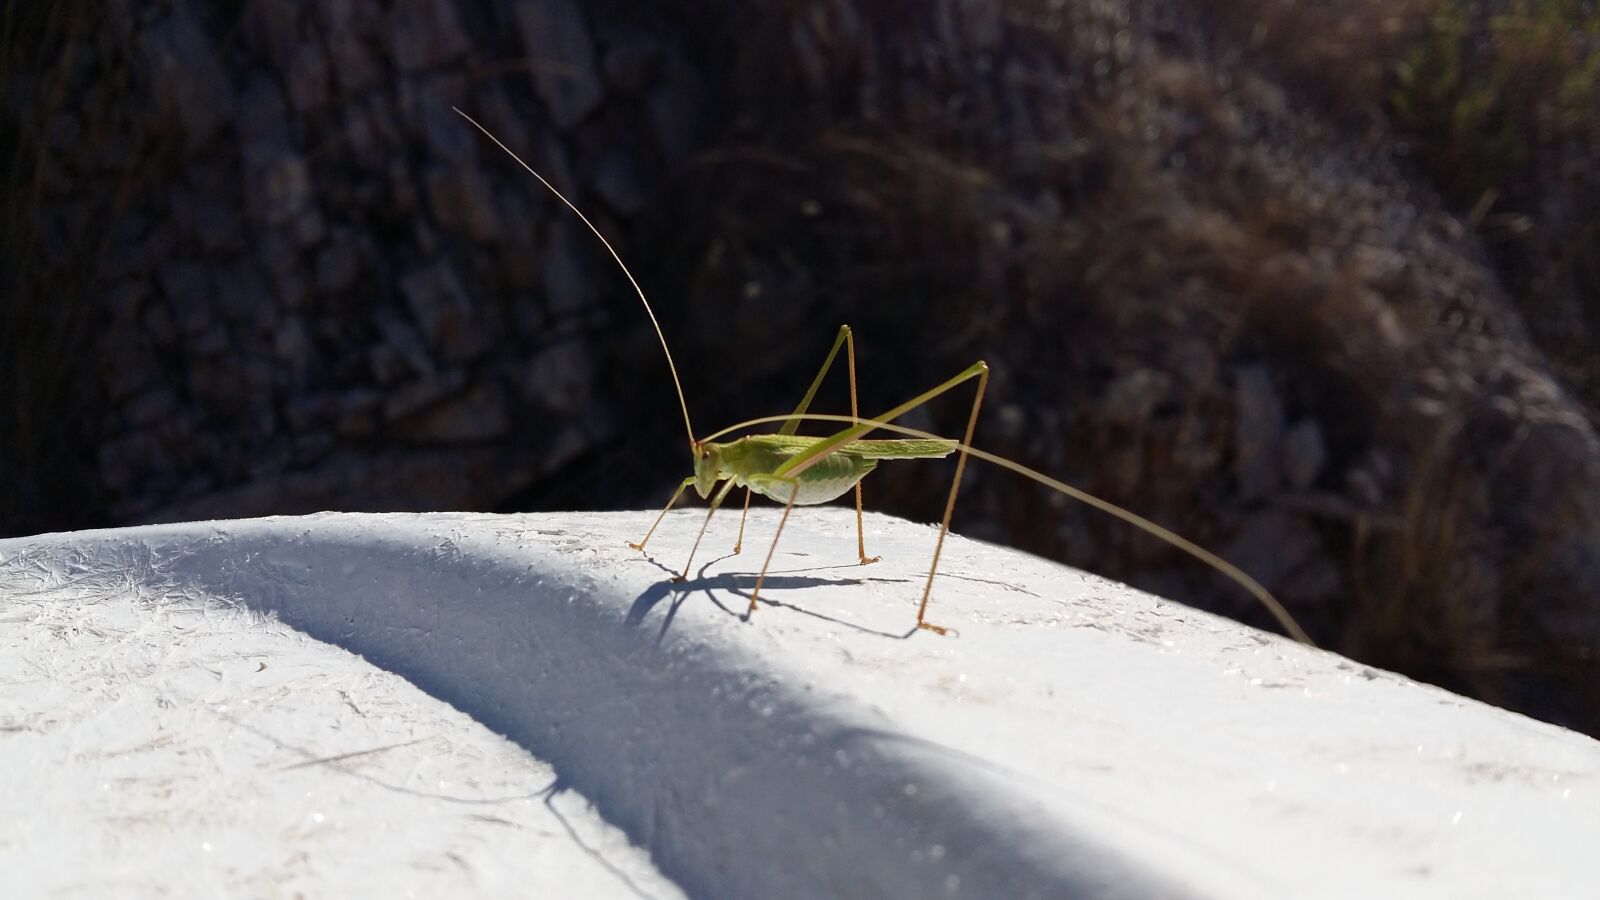 Samsung Galaxy A5 sample photo. Grasshopper, insect, nature photography